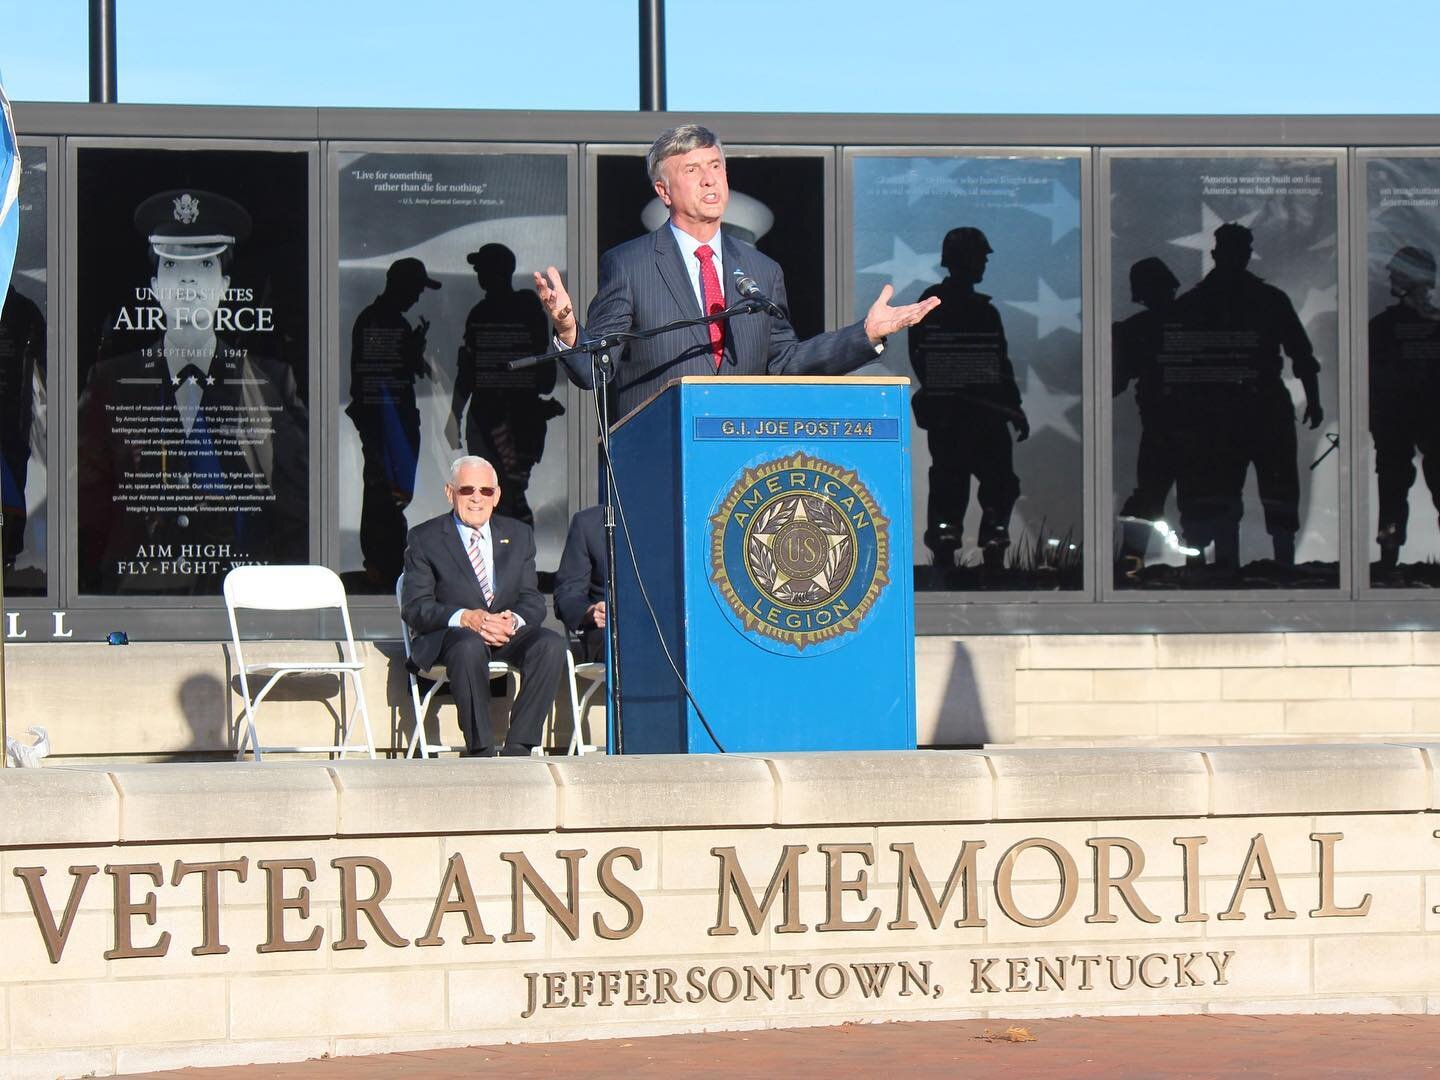 What a special occasion I experienced Sunday afternoon! The 28th annual Veterans Day Program put on by the City of Jeffersontown and American Legion G.I. Joe Post #244 was held Sunday afternoon in picture perfect warm weather. This was my 12th and fi